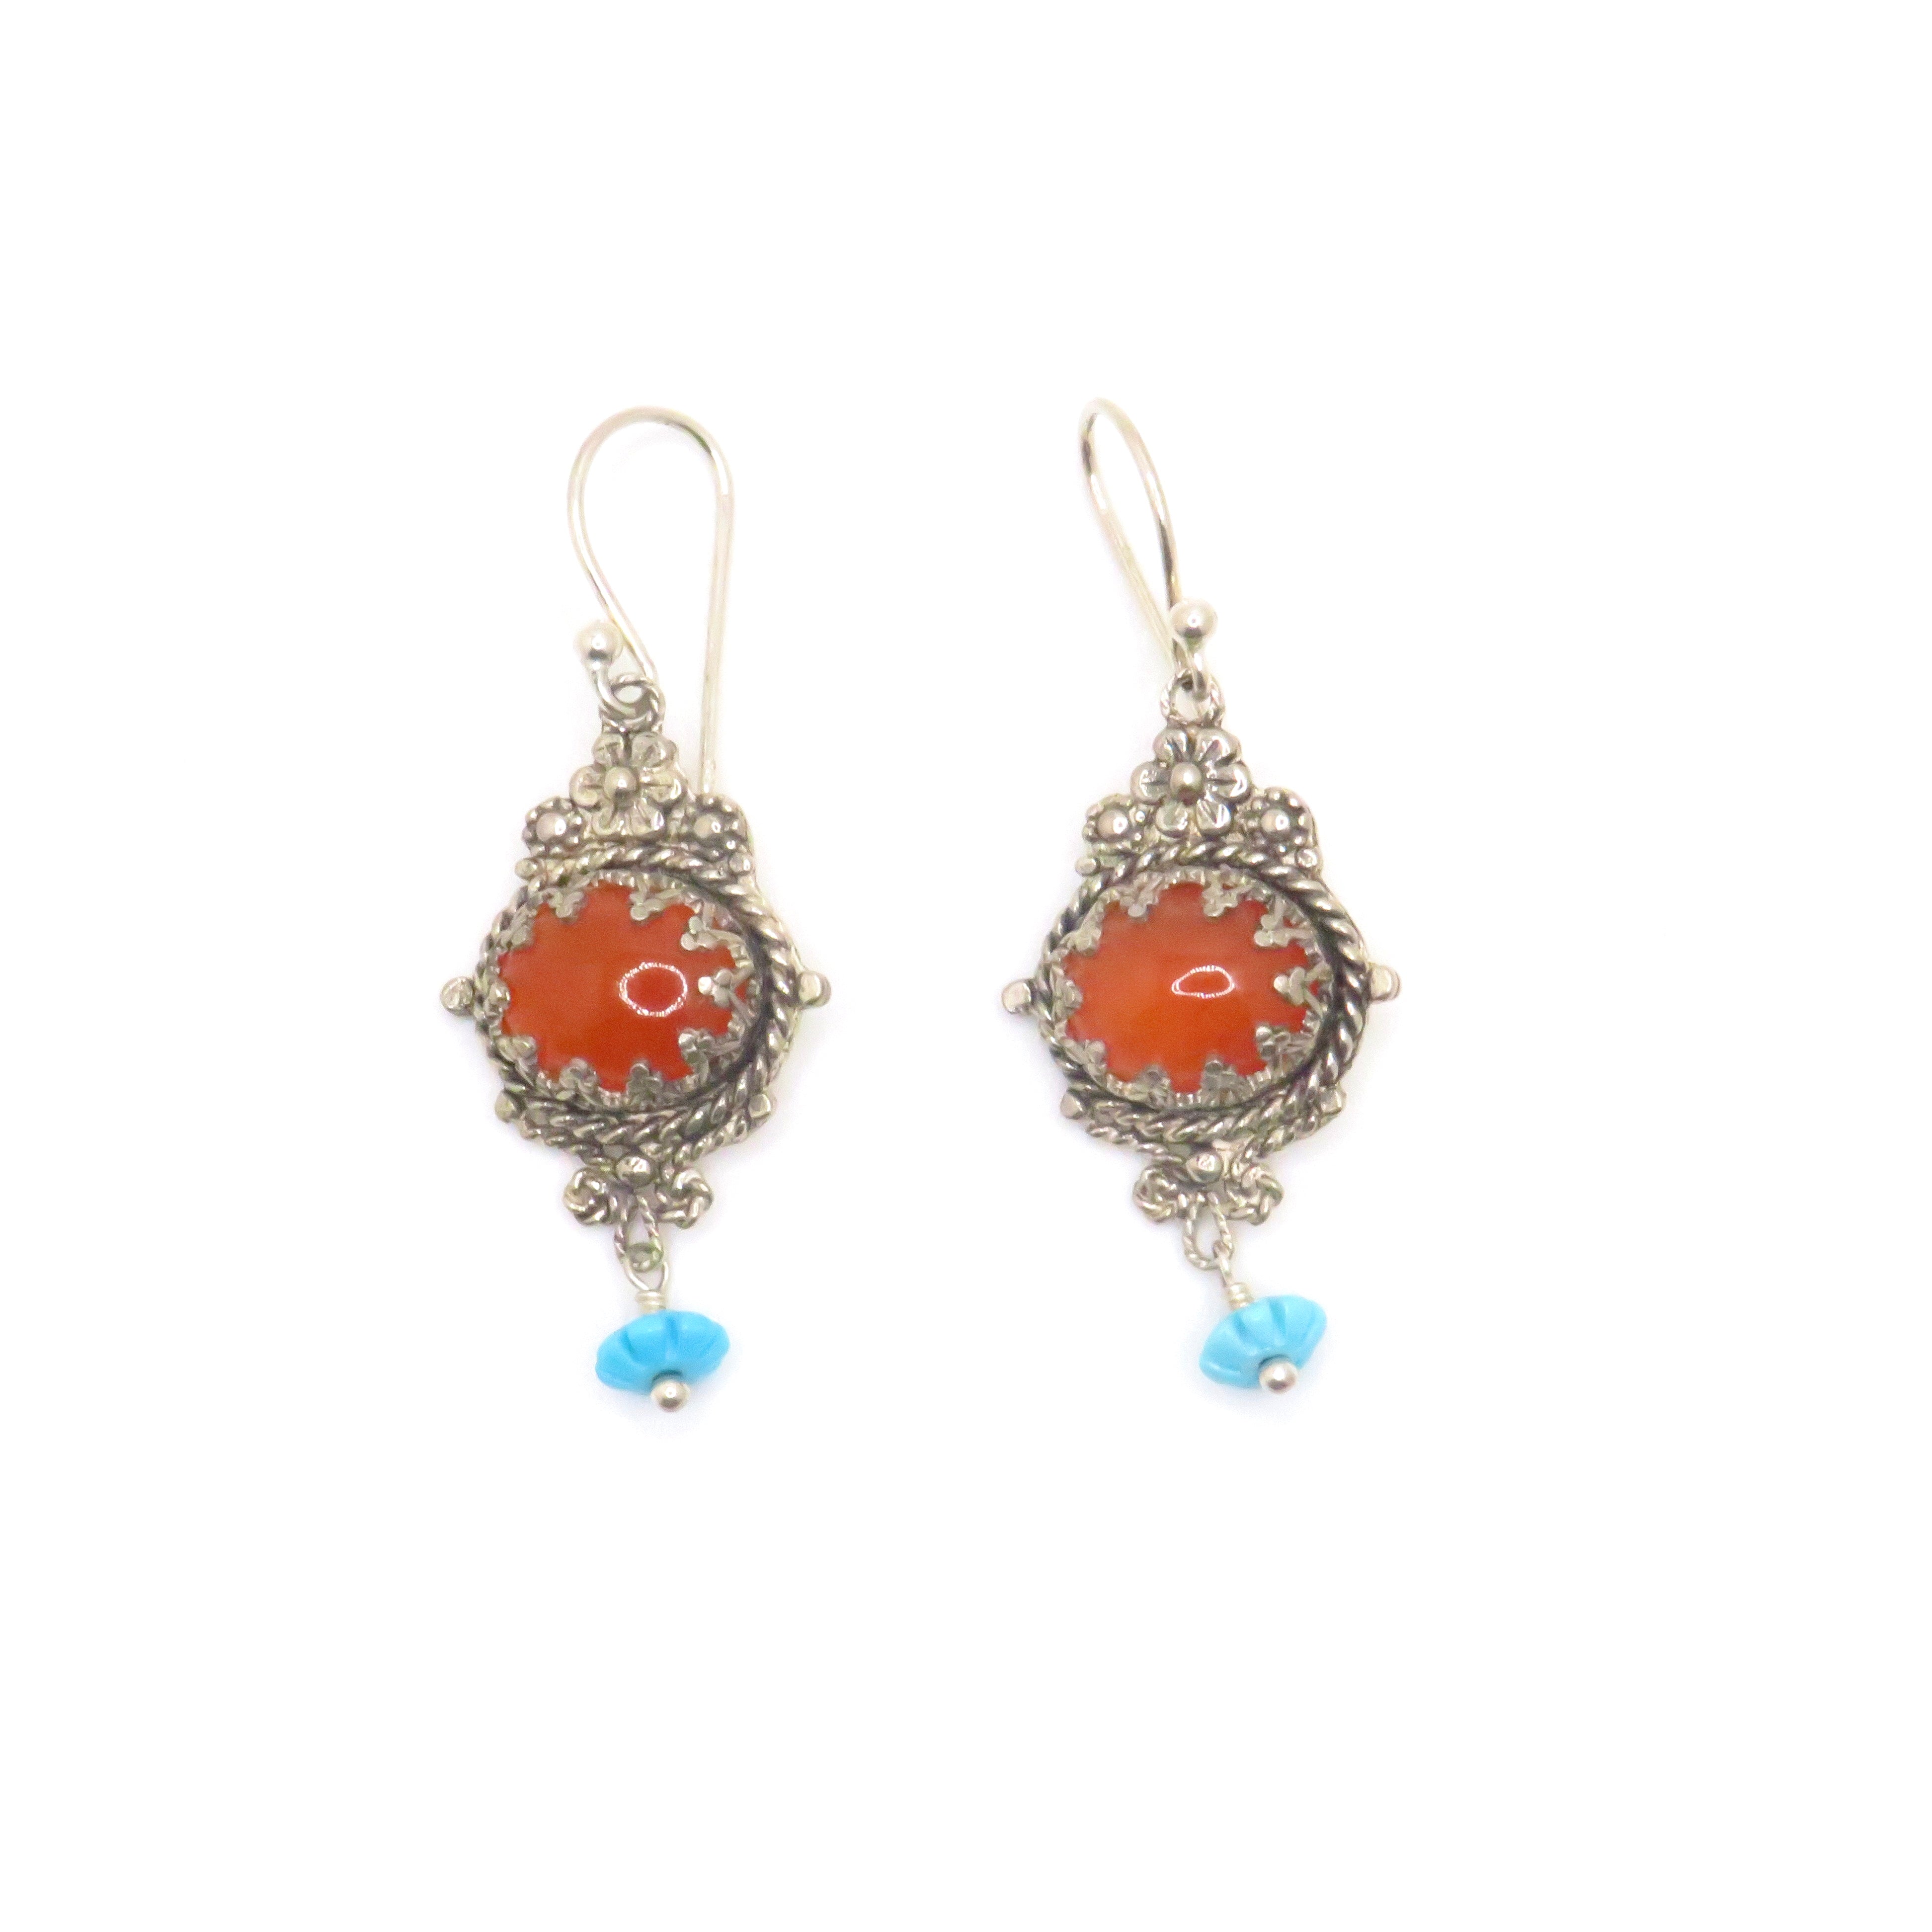 Carnelian and Turquoise Sterling Silver Filigree Daisy Earrings